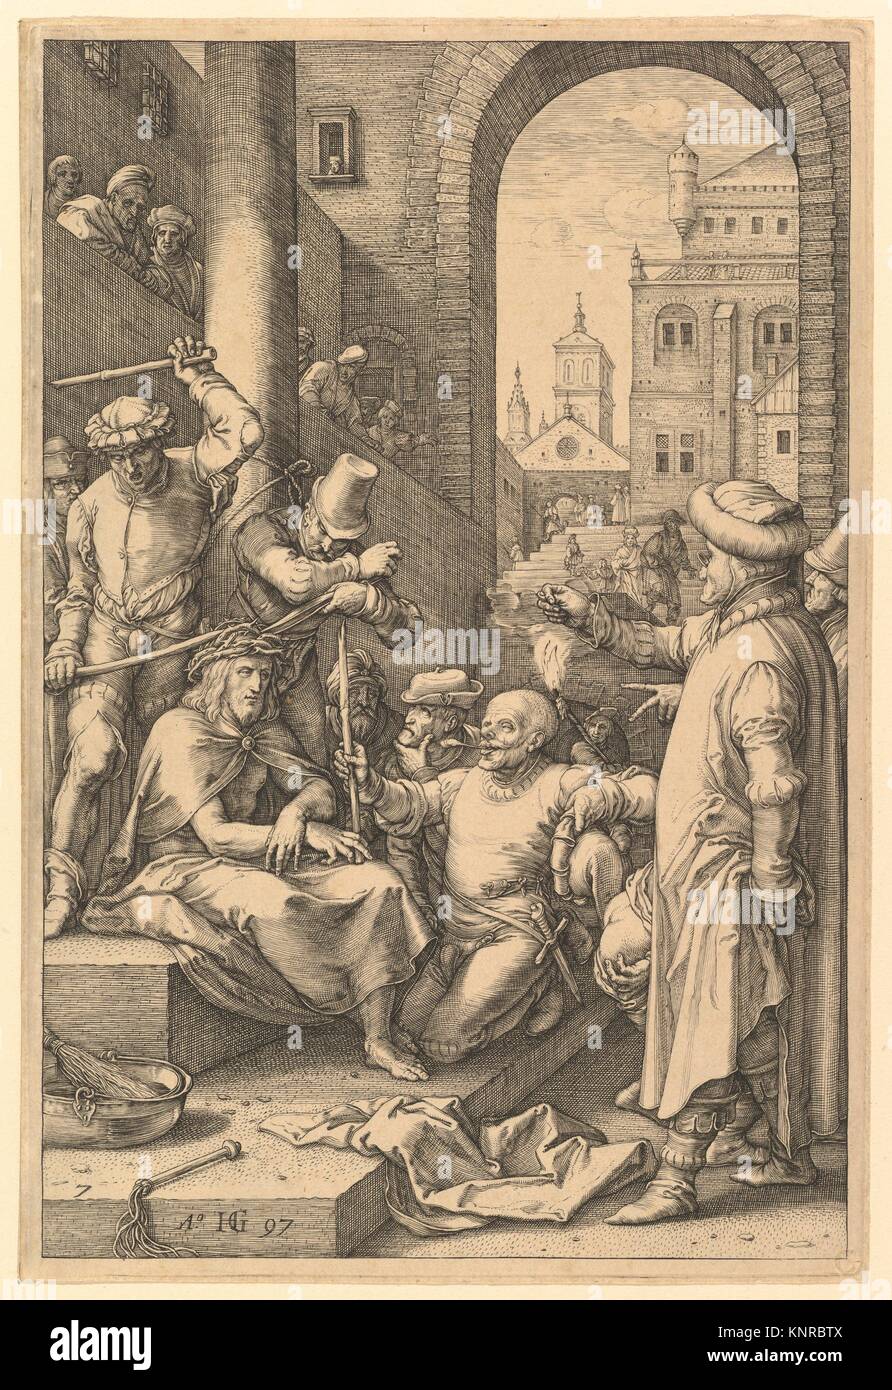 The Crowning with Thorns, from The Passion of Christ. Artist: Hendrick Goltzius (Netherlandish, Mühlbracht 1558-1617 Haarlem); Date: 1597; Medium: Stock Photo